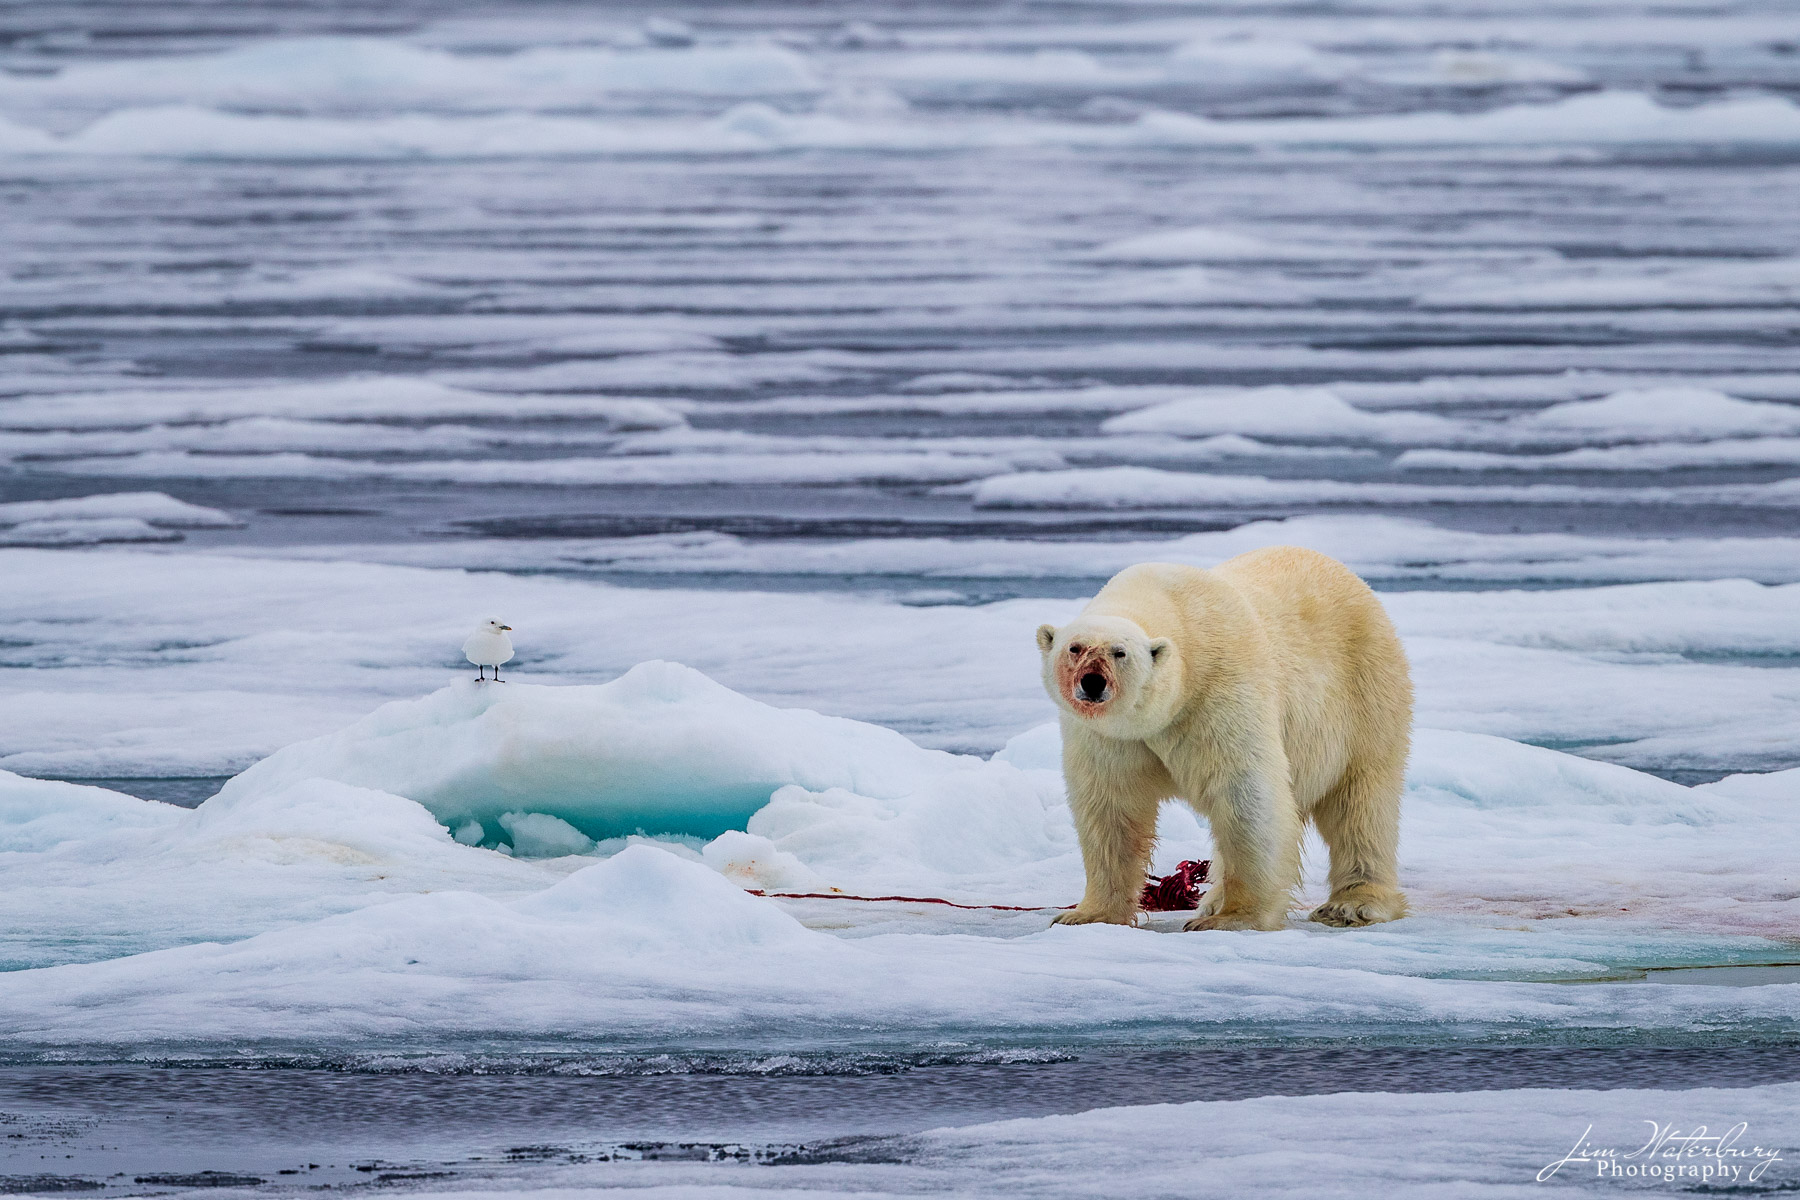 A well-fed polar bear following a successful seal hunt on the pack ice in the Arctic Ocean north of Svalbard.